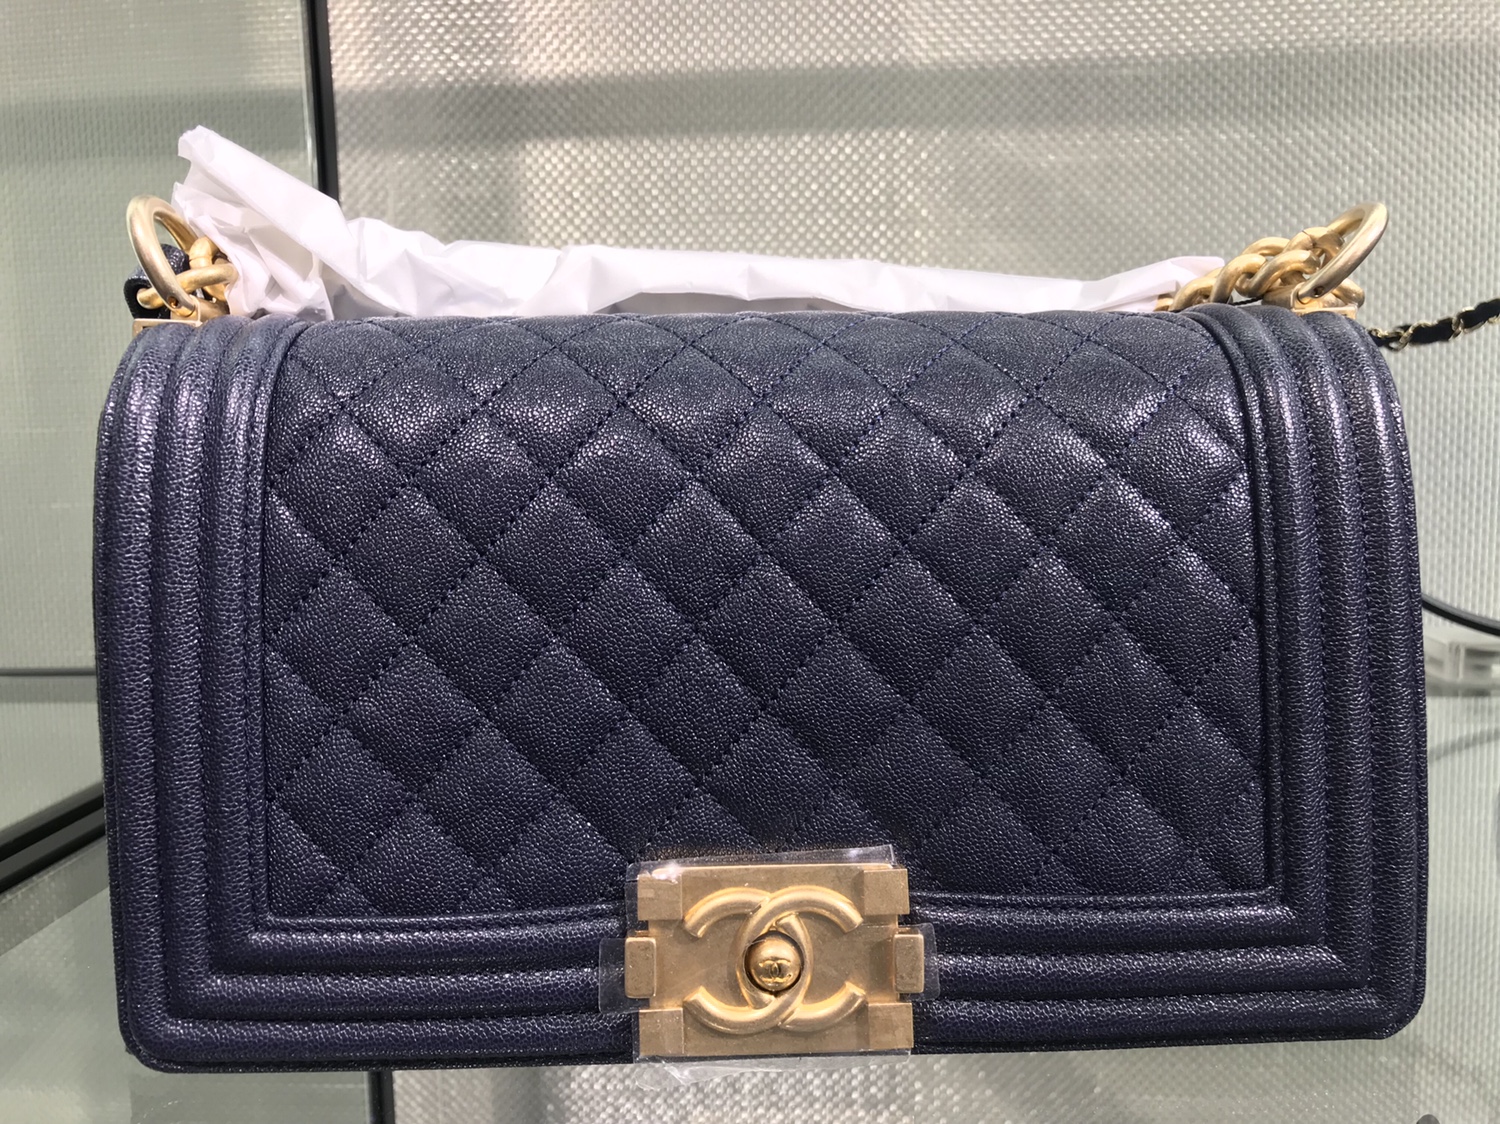 Chanel coco handle issue - help!